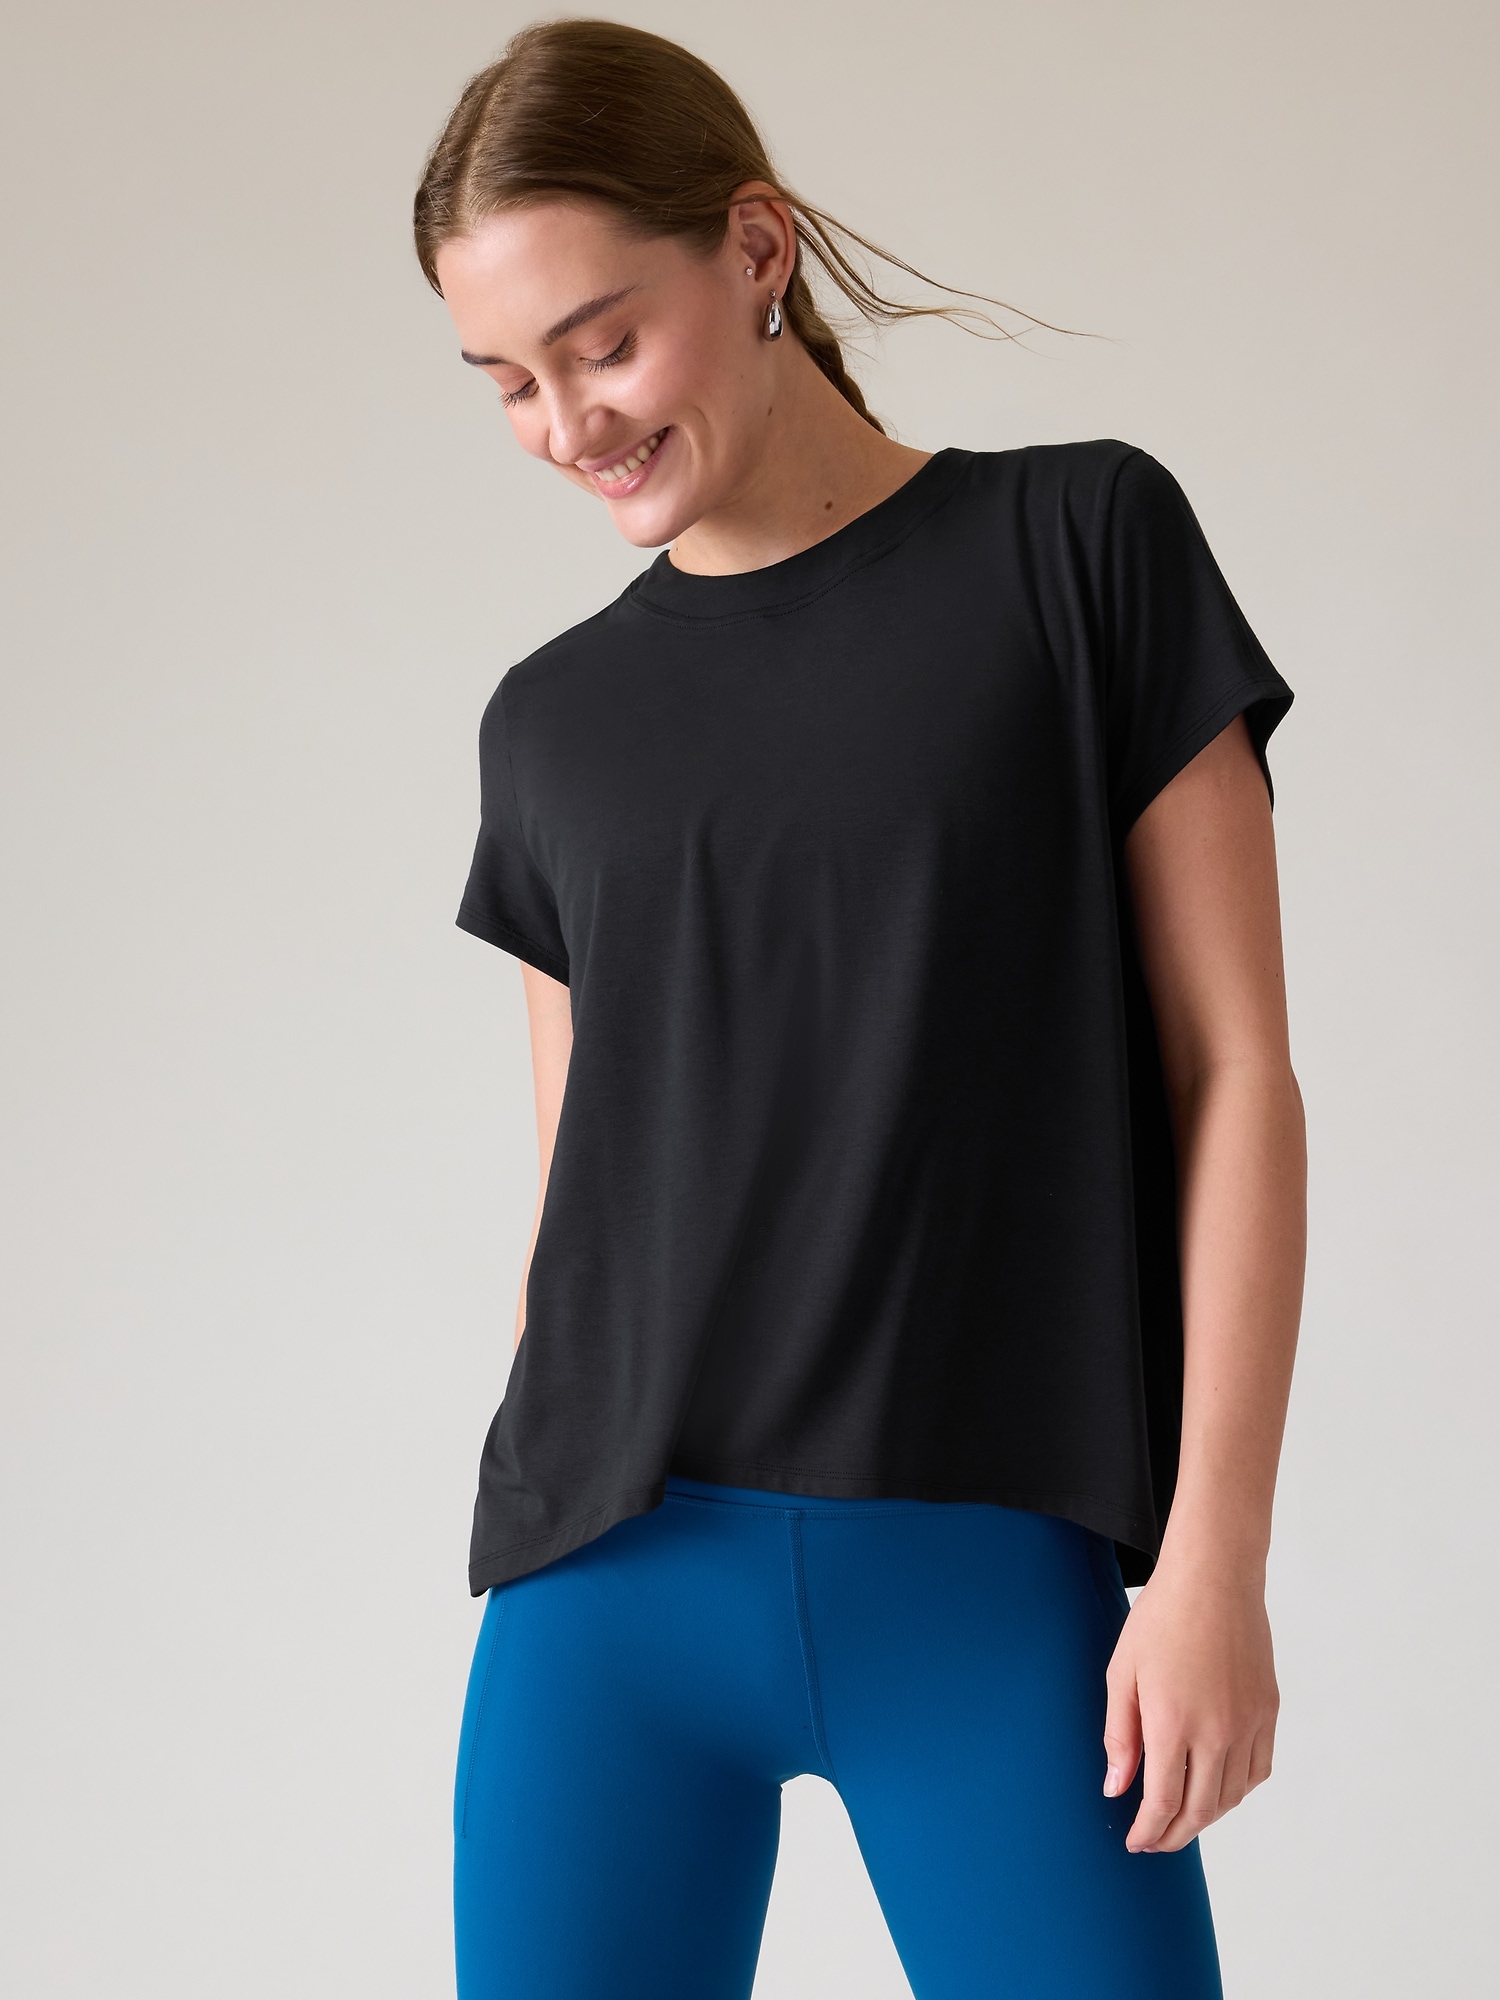 Athleta With Ease Tee In Black